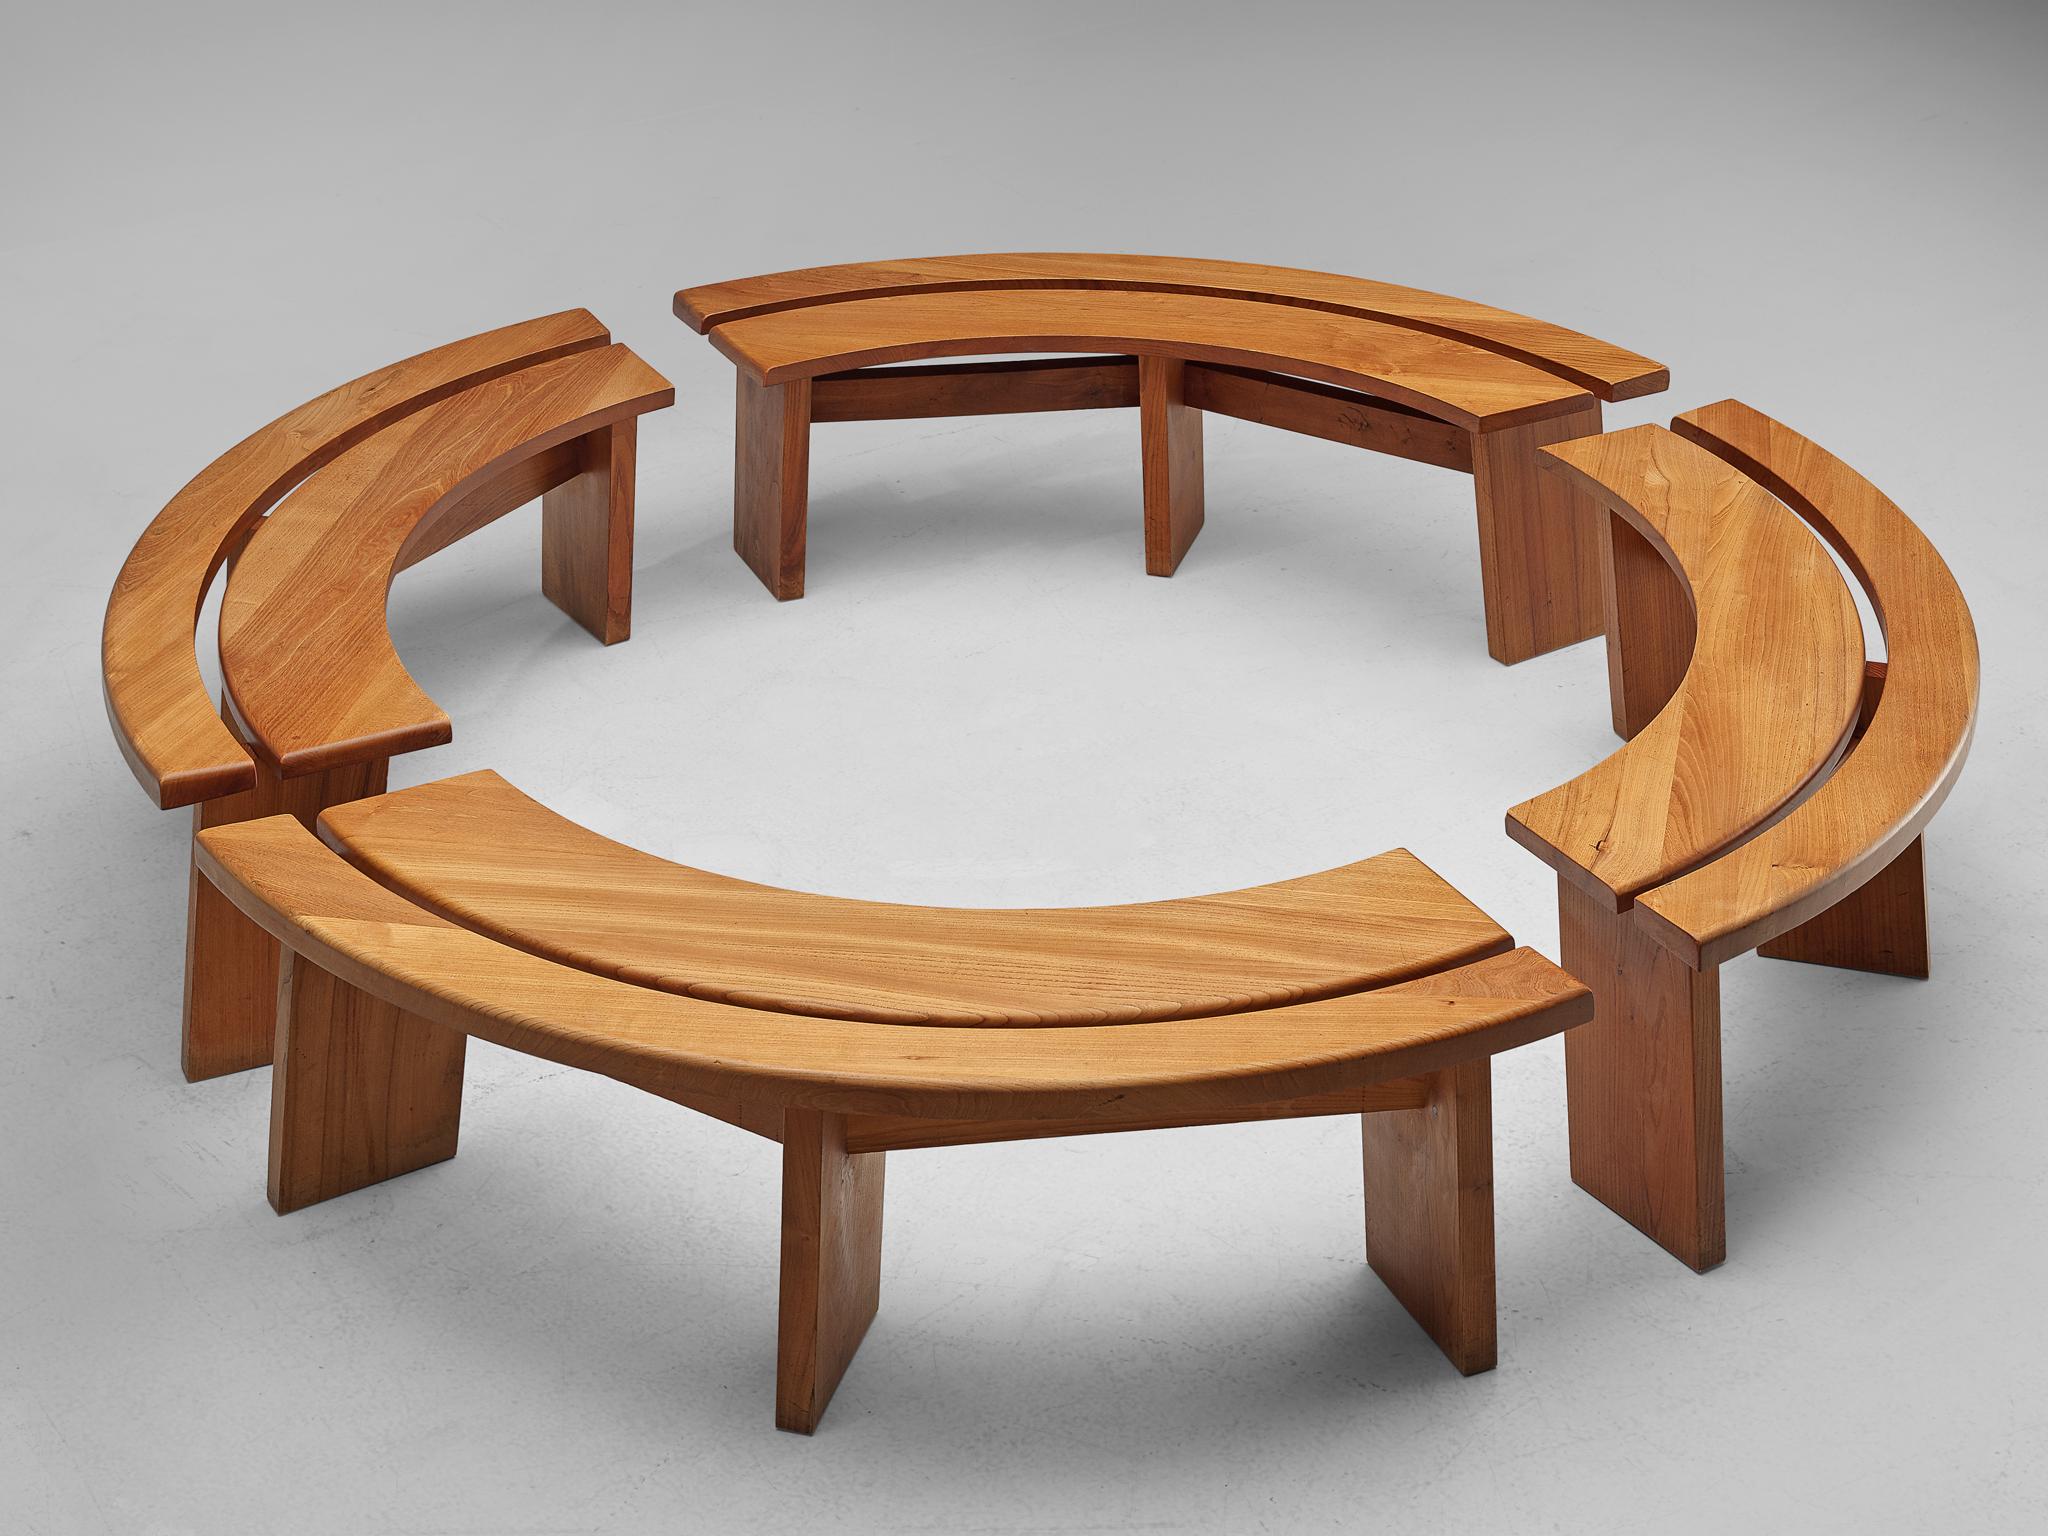 Pierre chapo, set of four 'S38A' benches, elm, France, 1960s.

This pair of ‘S38A’ benches are designed by Pierre Chapo in the 1960s. A soft, warm all-over patina is visible on the wood on this particular pair. This emphasizes the natural